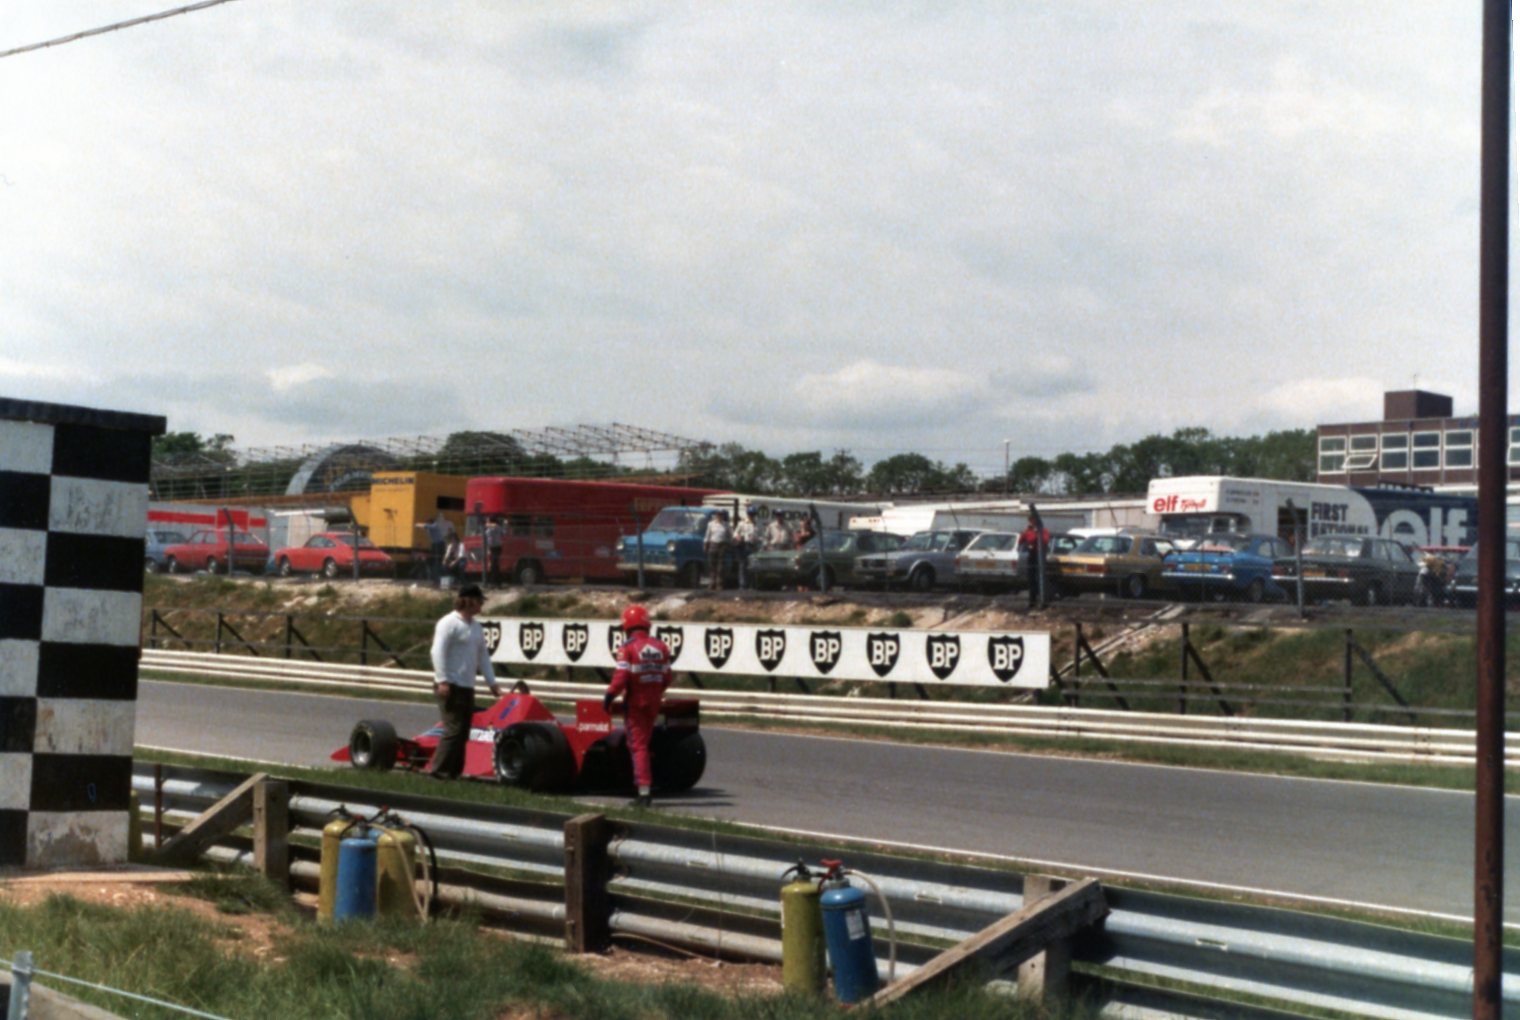 F1 cars at Brands Hatch  - Page 4 - Formula 1 - PistonHeads